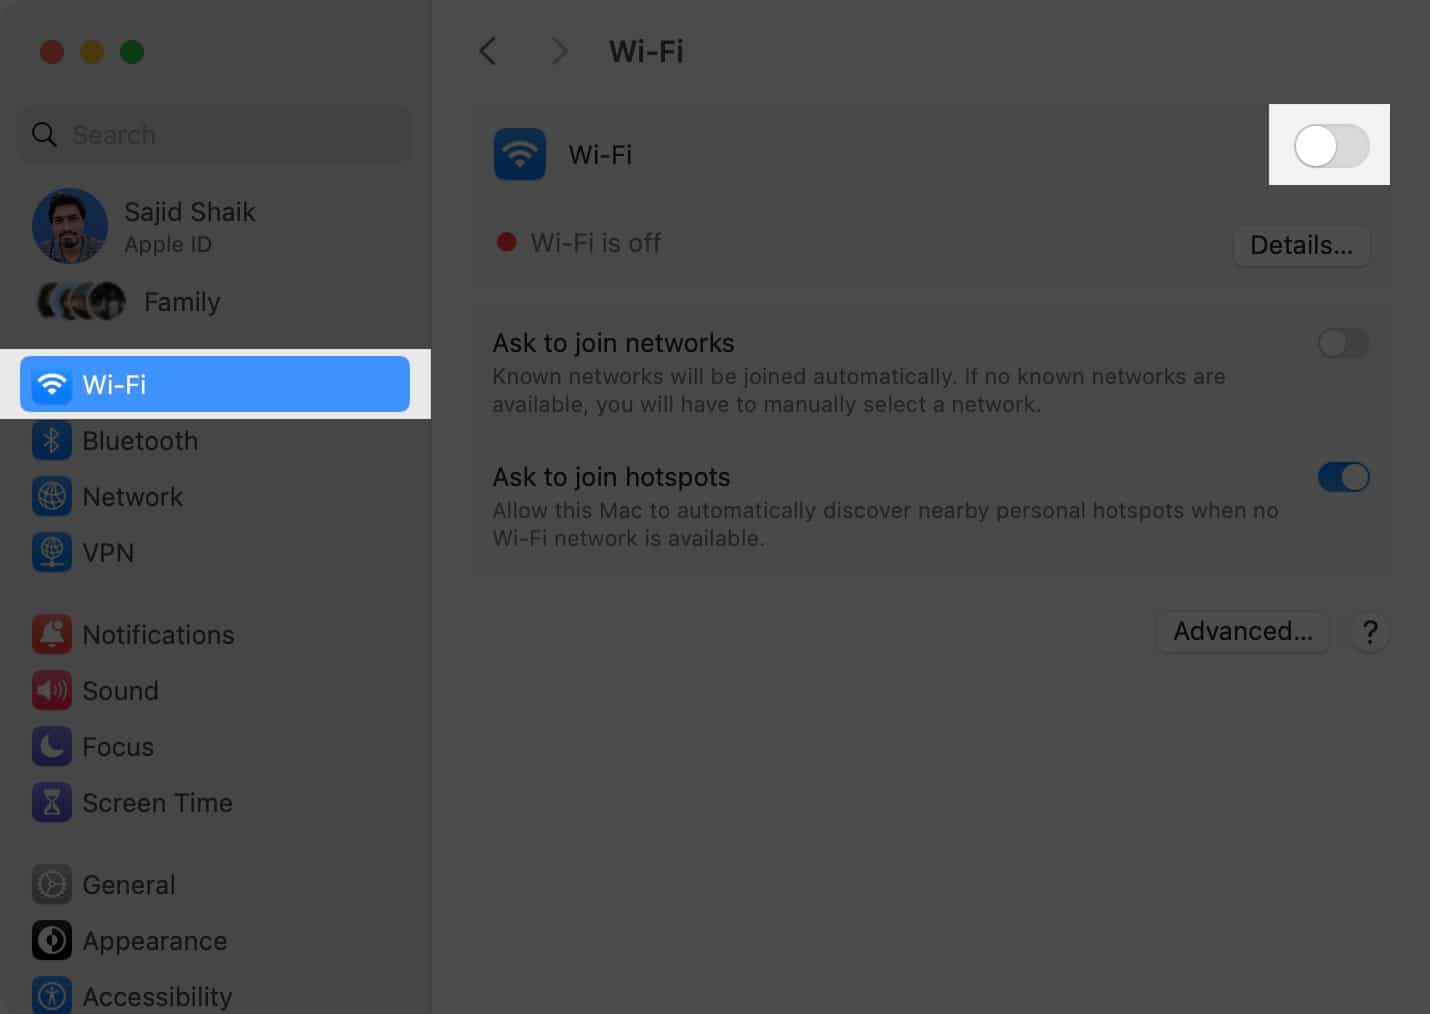 Select Wi-Fi in System Settings and turn off the Wi-Fi toggle